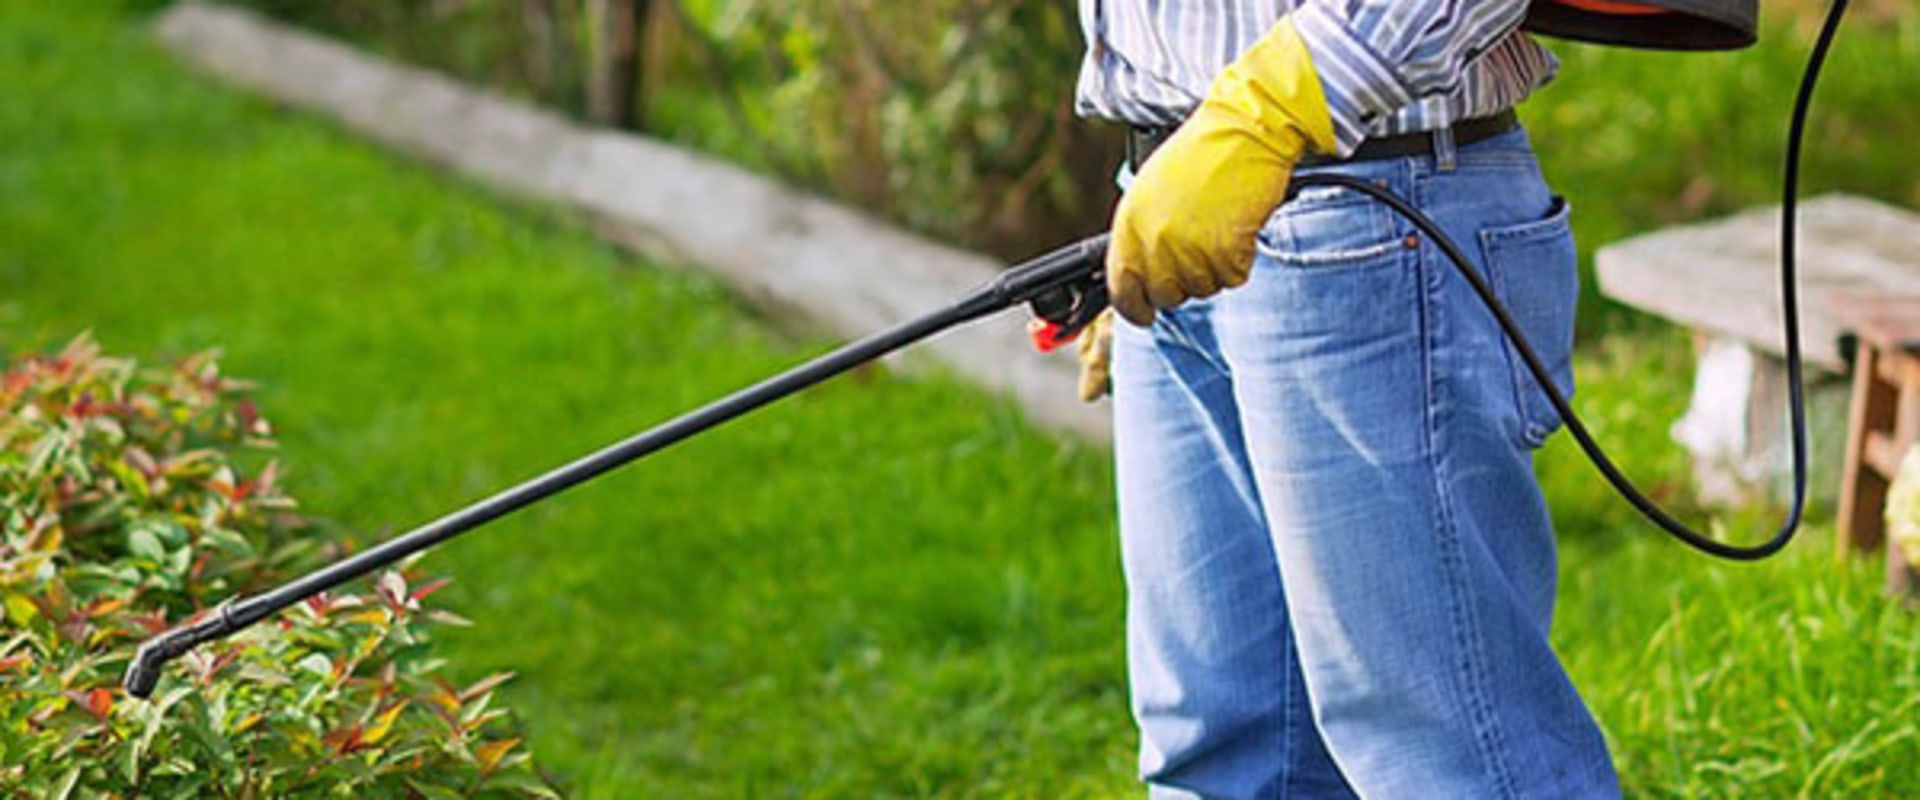 How much does lawn pest control cost?